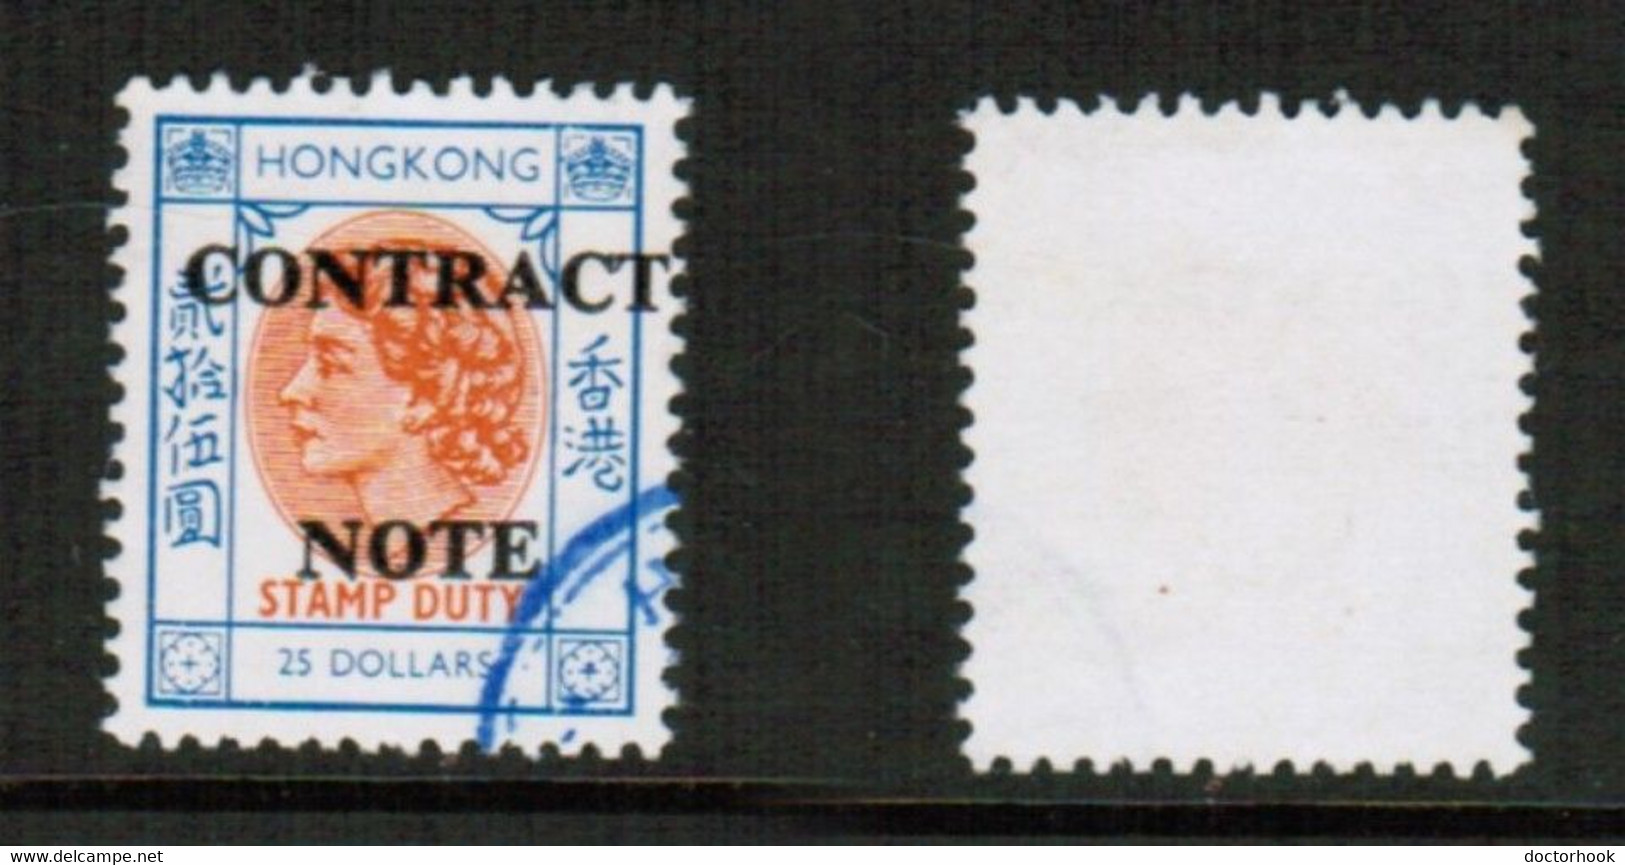 HONG KONG   $25.00 DOLLAR CONTRACT NOTE FISCAL USED (CONDITION AS PER SCAN) (Stamp Scan # 829-2) - Stempelmarke Als Postmarke Verwendet